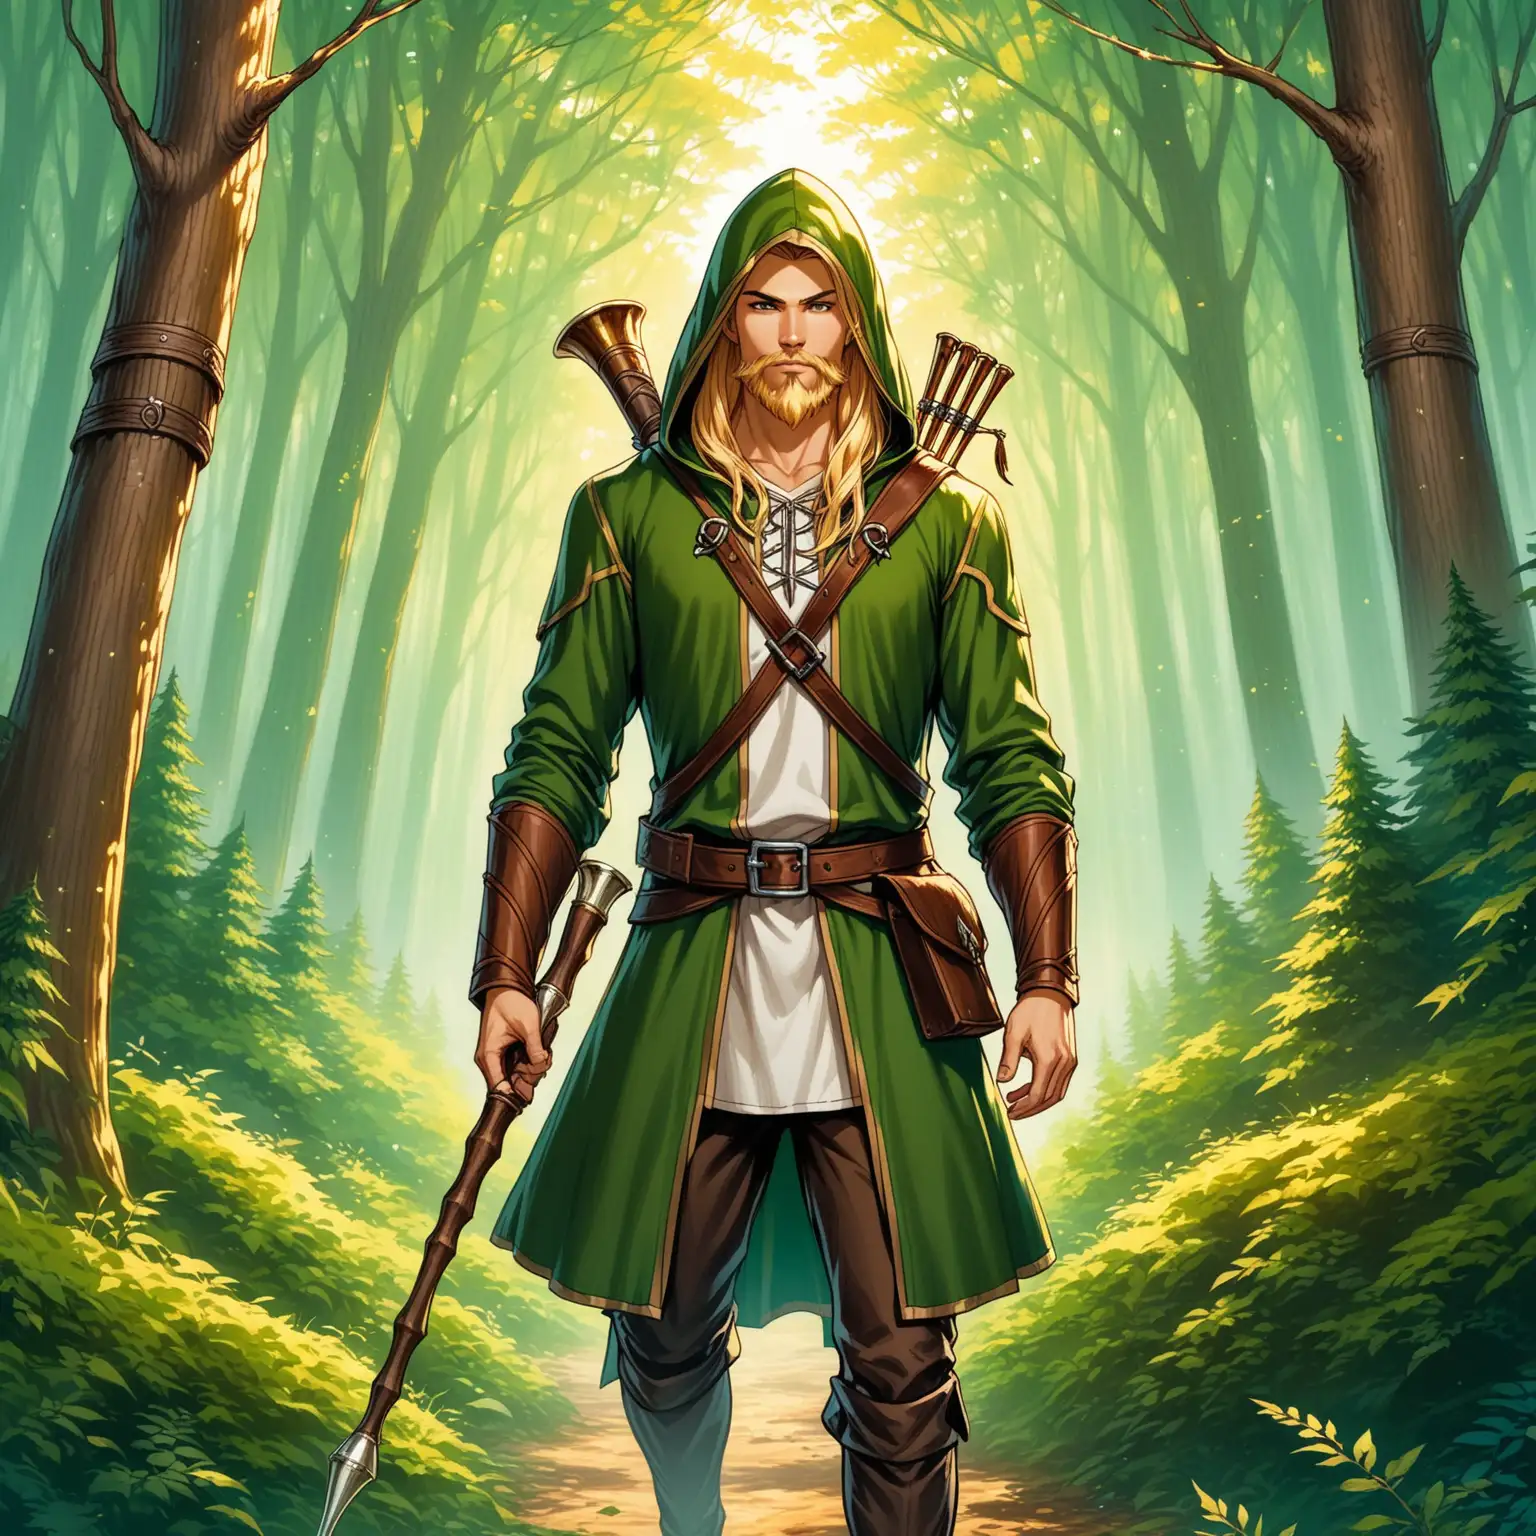 Archer with Long Blond Hair and Hood in Fantasy Forest